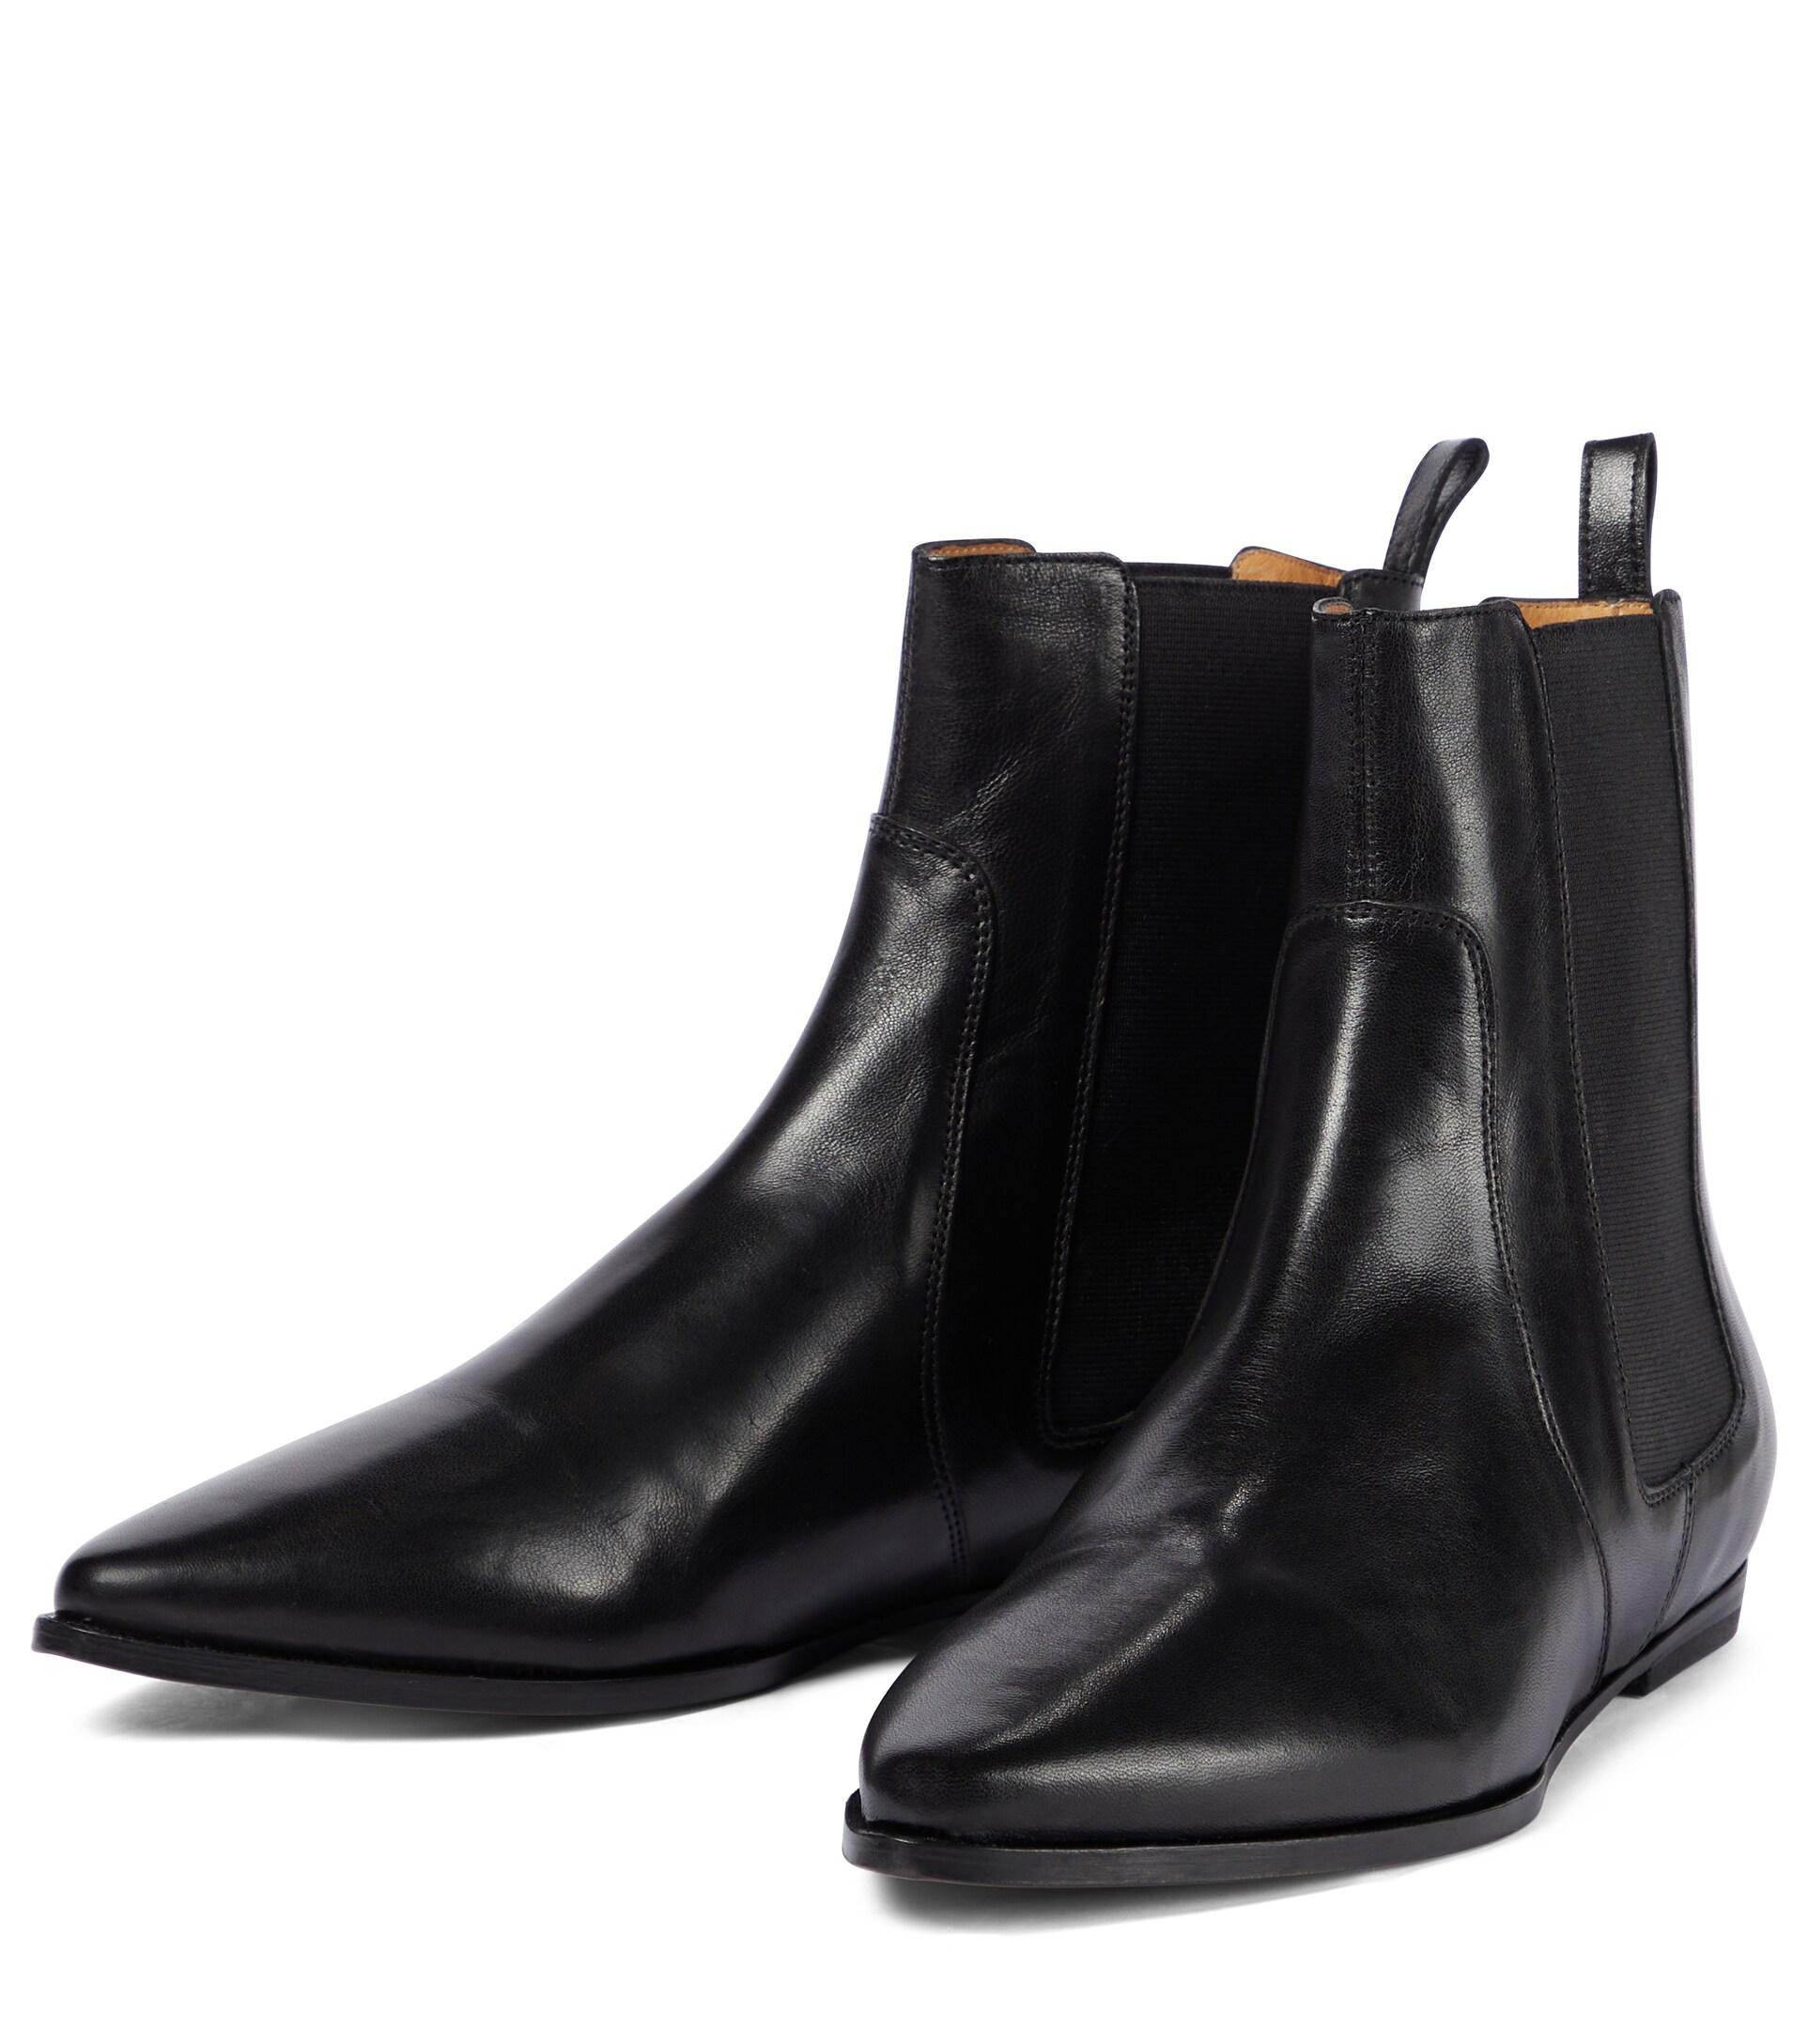 Isabel Marant Duiza Flat Leather Ankle Boots in Black | Lyst